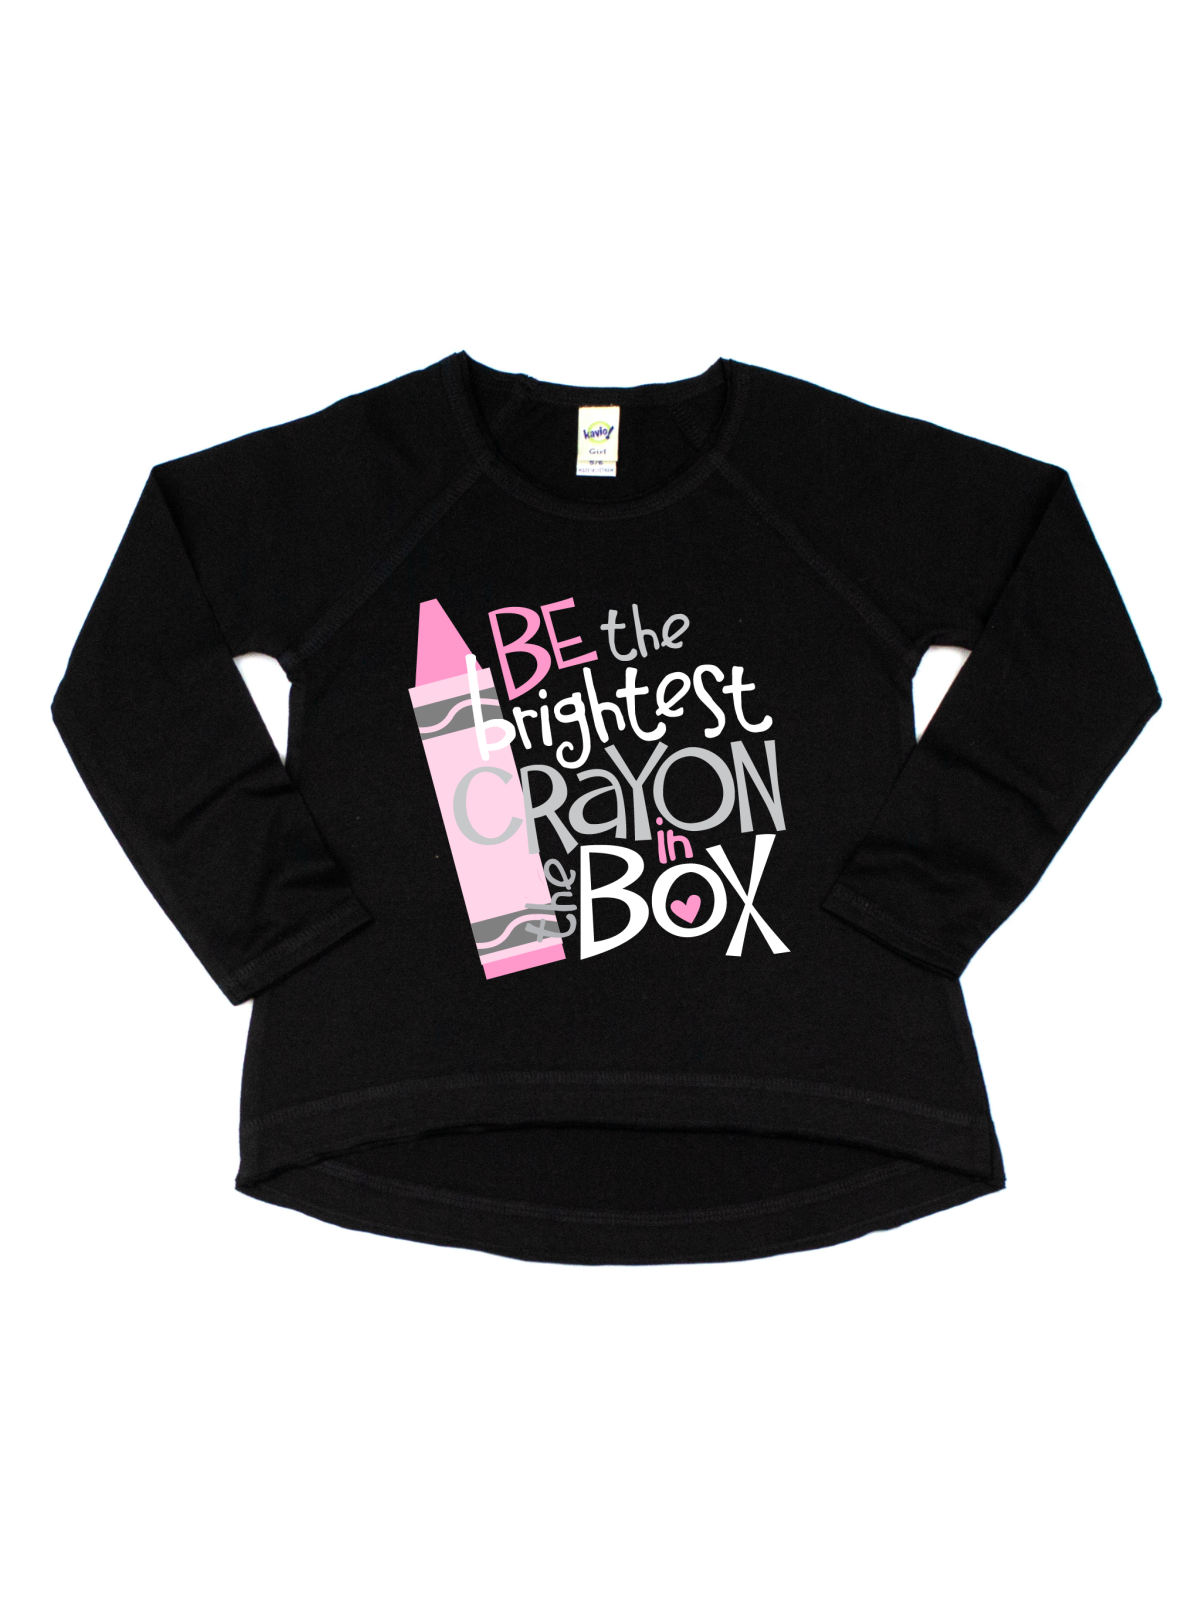 Be the Brightest Crayon in the Box Girls Long Sleeve Shirt - Pink & Black